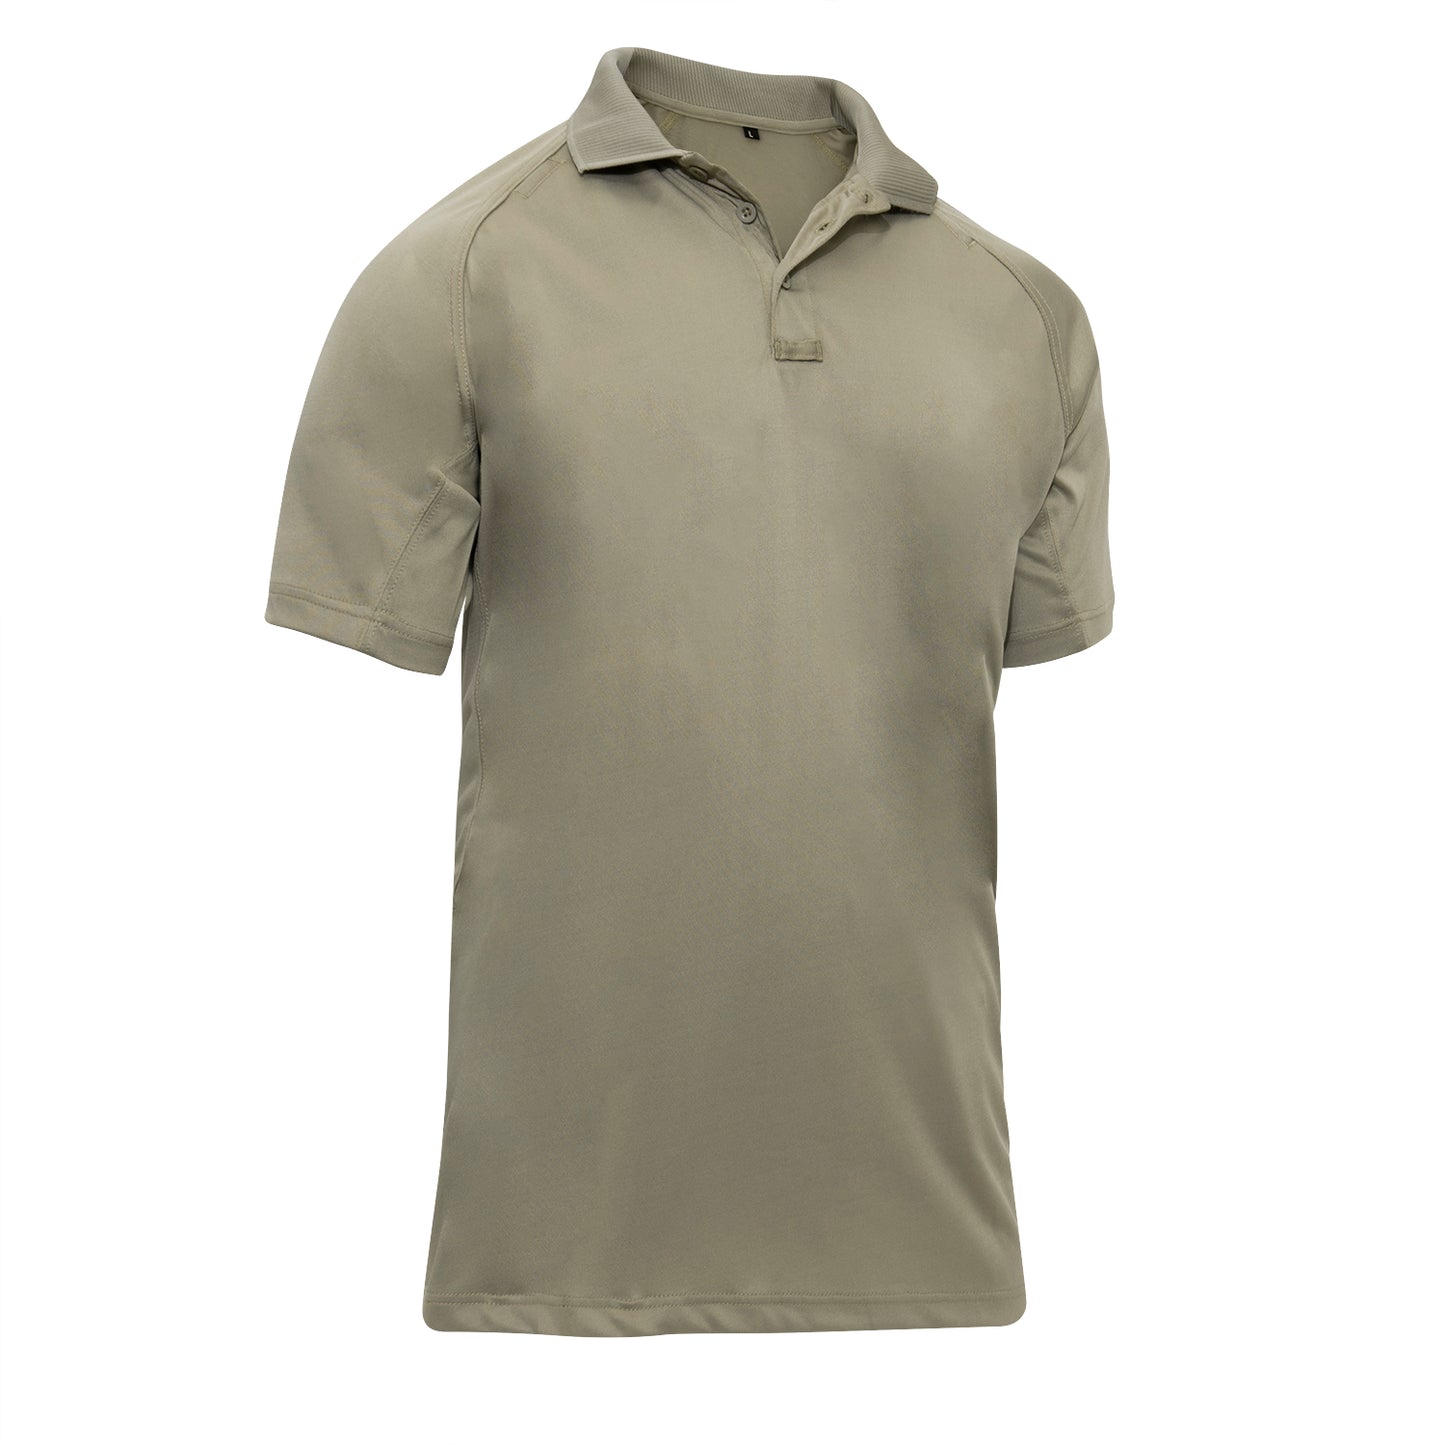 Men's On Duty Tactical Performance Polo Shirt by Rothco